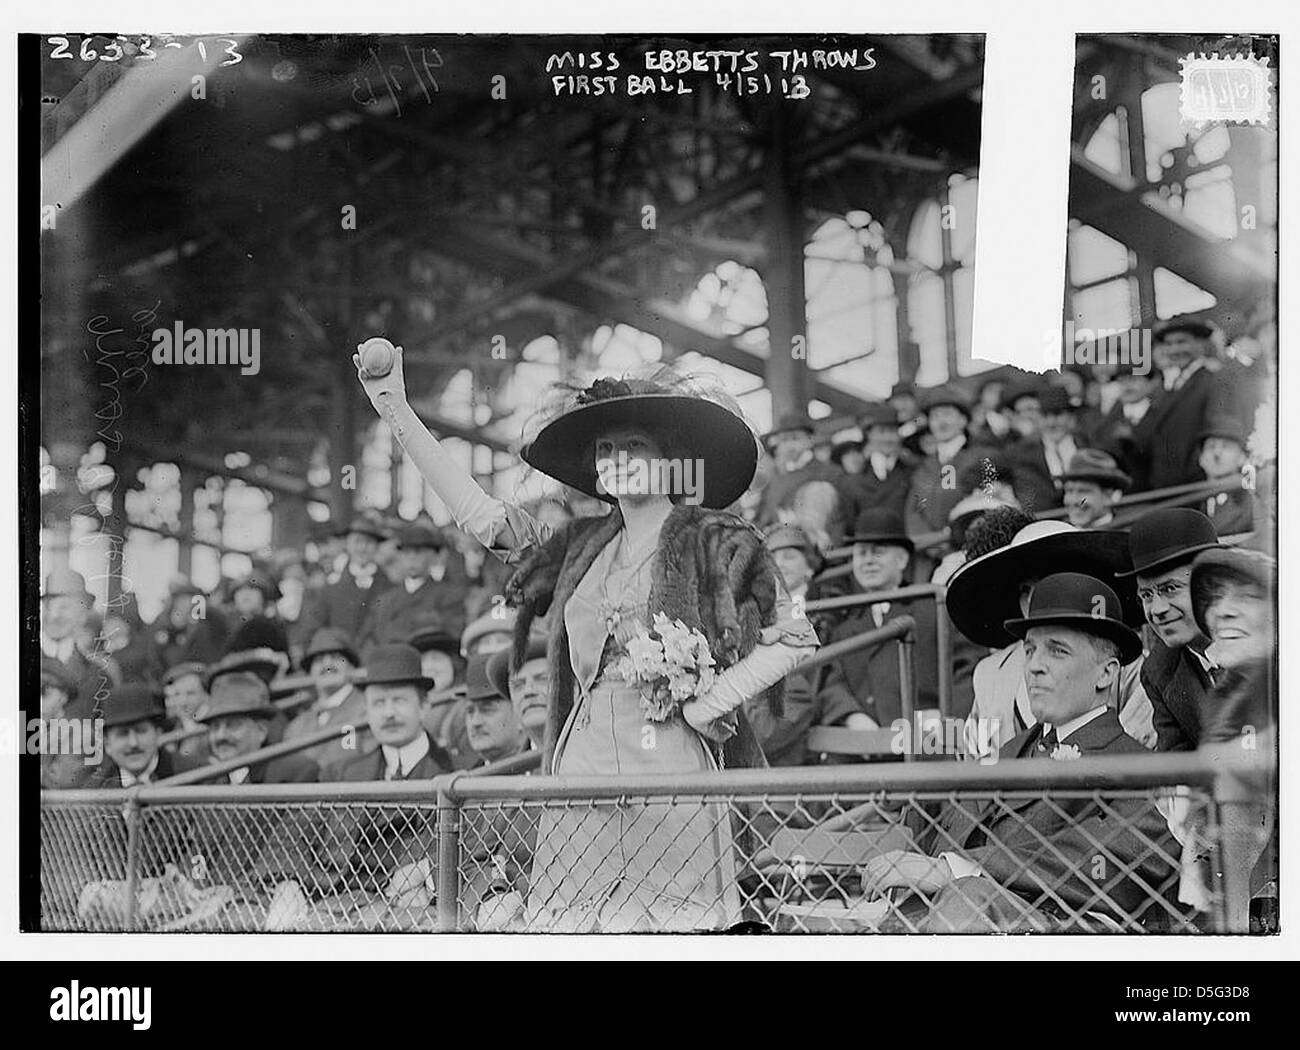 [Miss Genevieve Ebbets, youngest daughter of Charley Ebbets, throws first ball at opening of Ebbets Field (baseball)] (LOC) Stock Photo